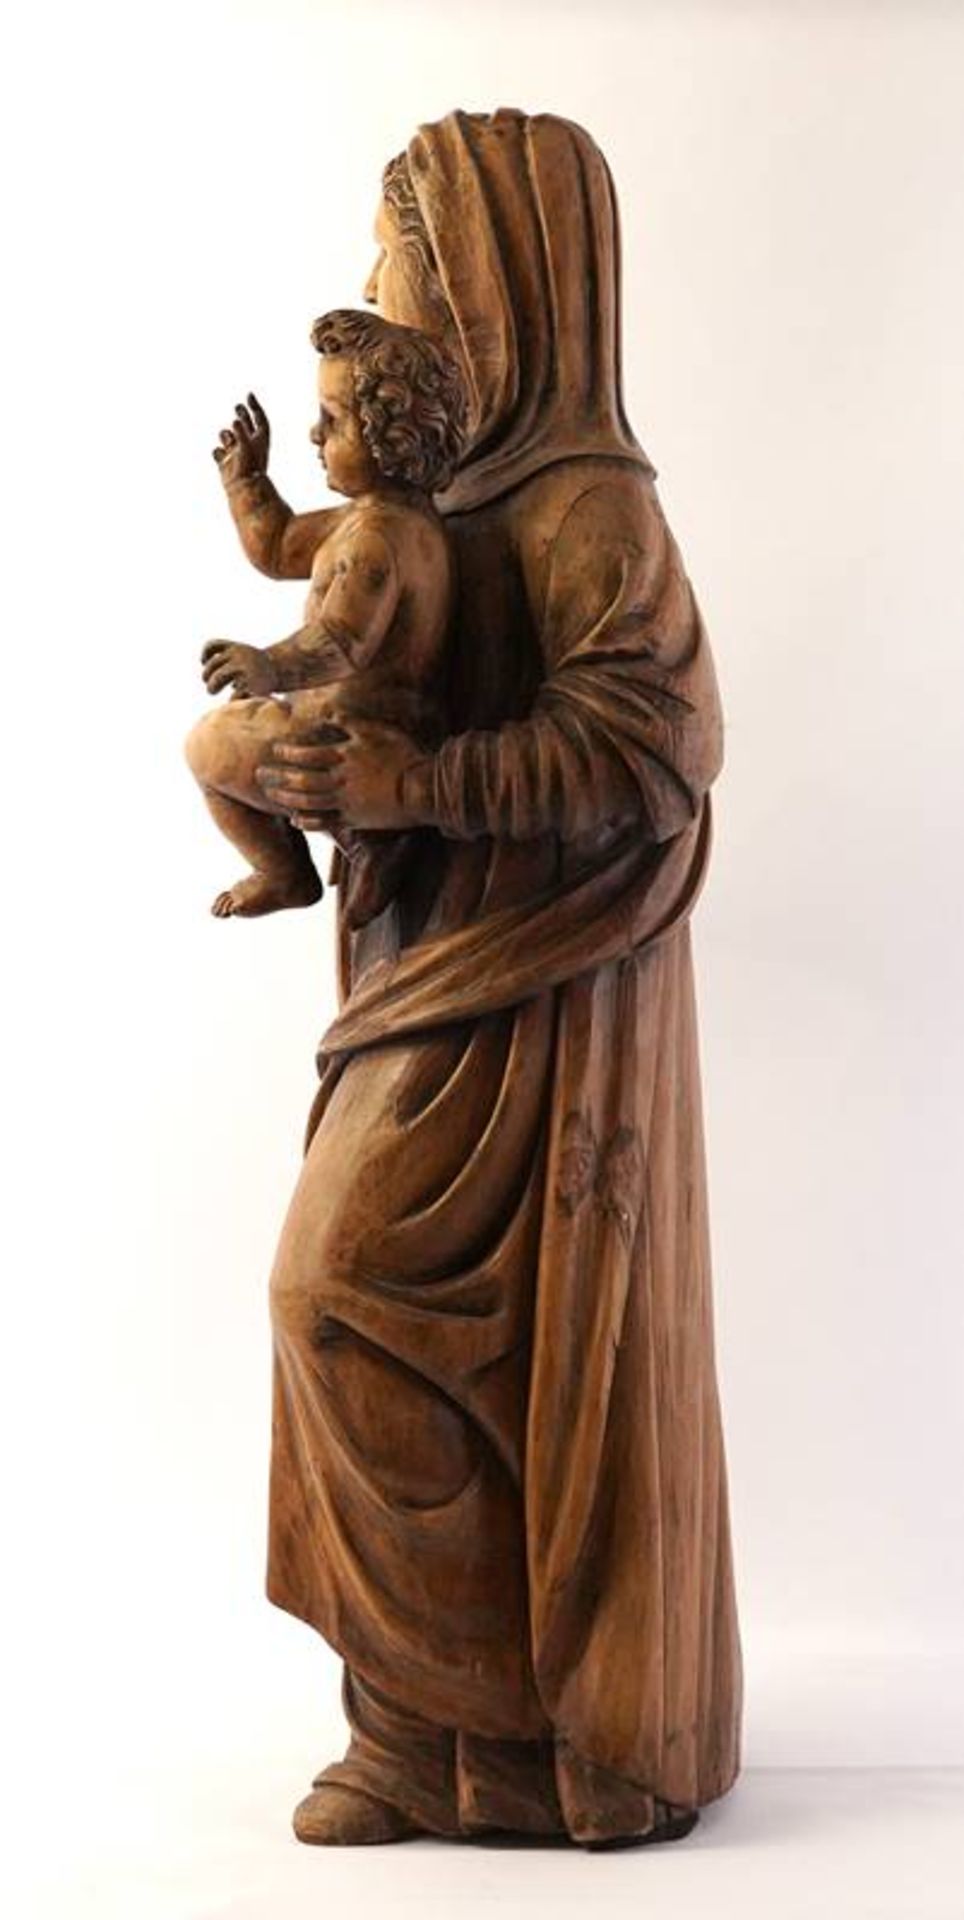 Mary with child - Image 2 of 6